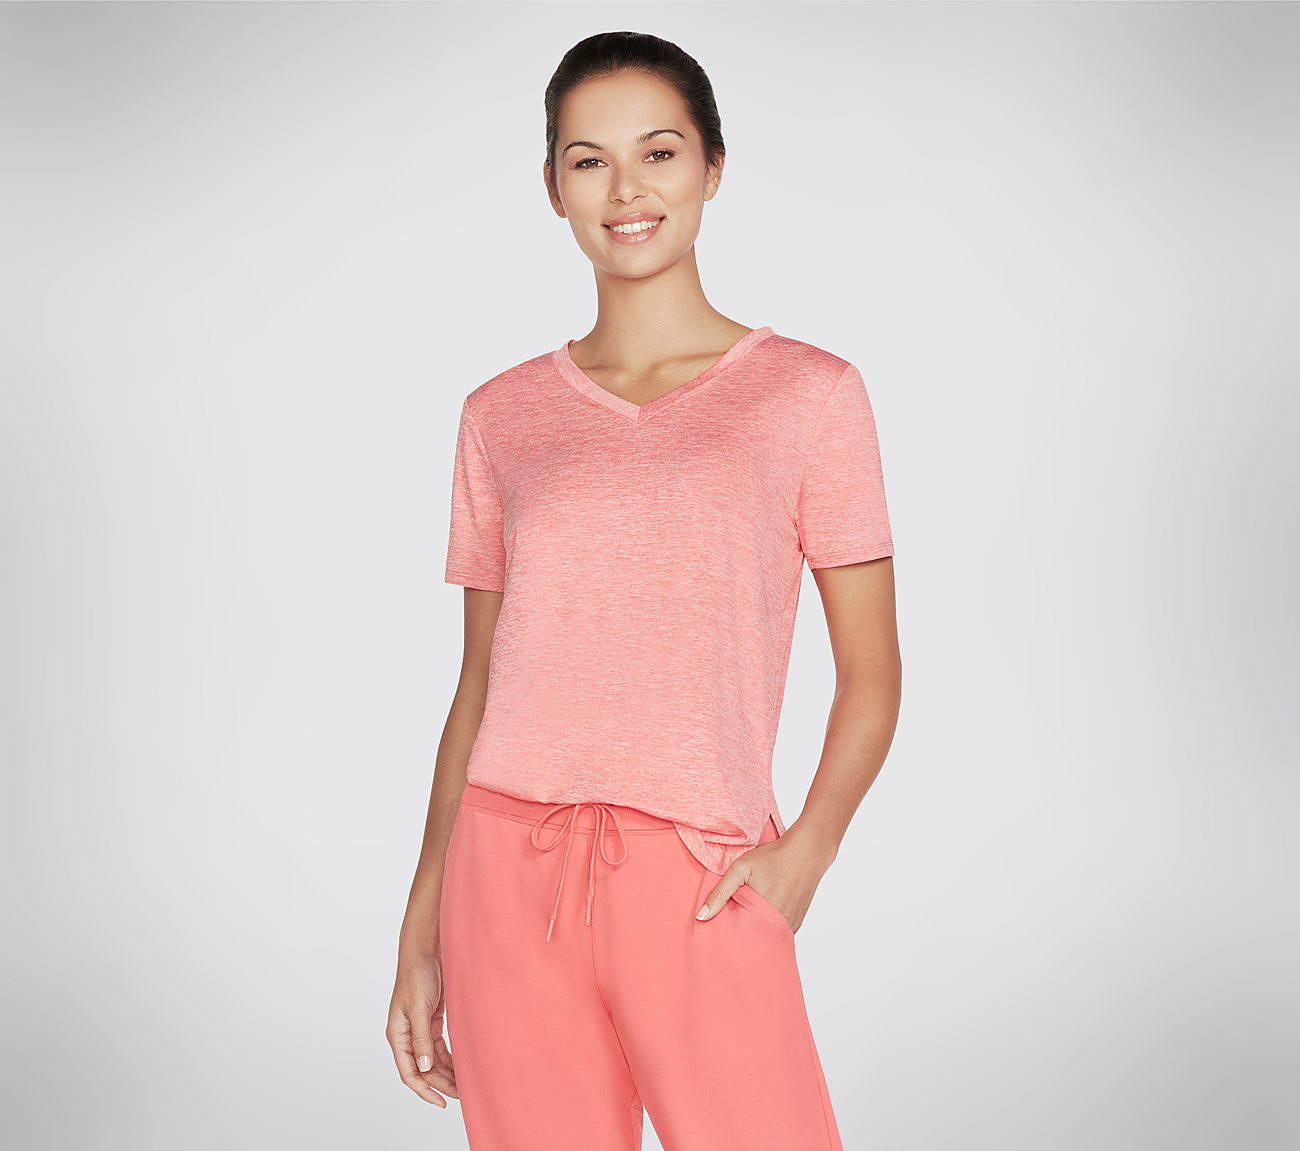 DIAMOND BLISSFUL TUNIC, CCORAL Apparel Lateral View